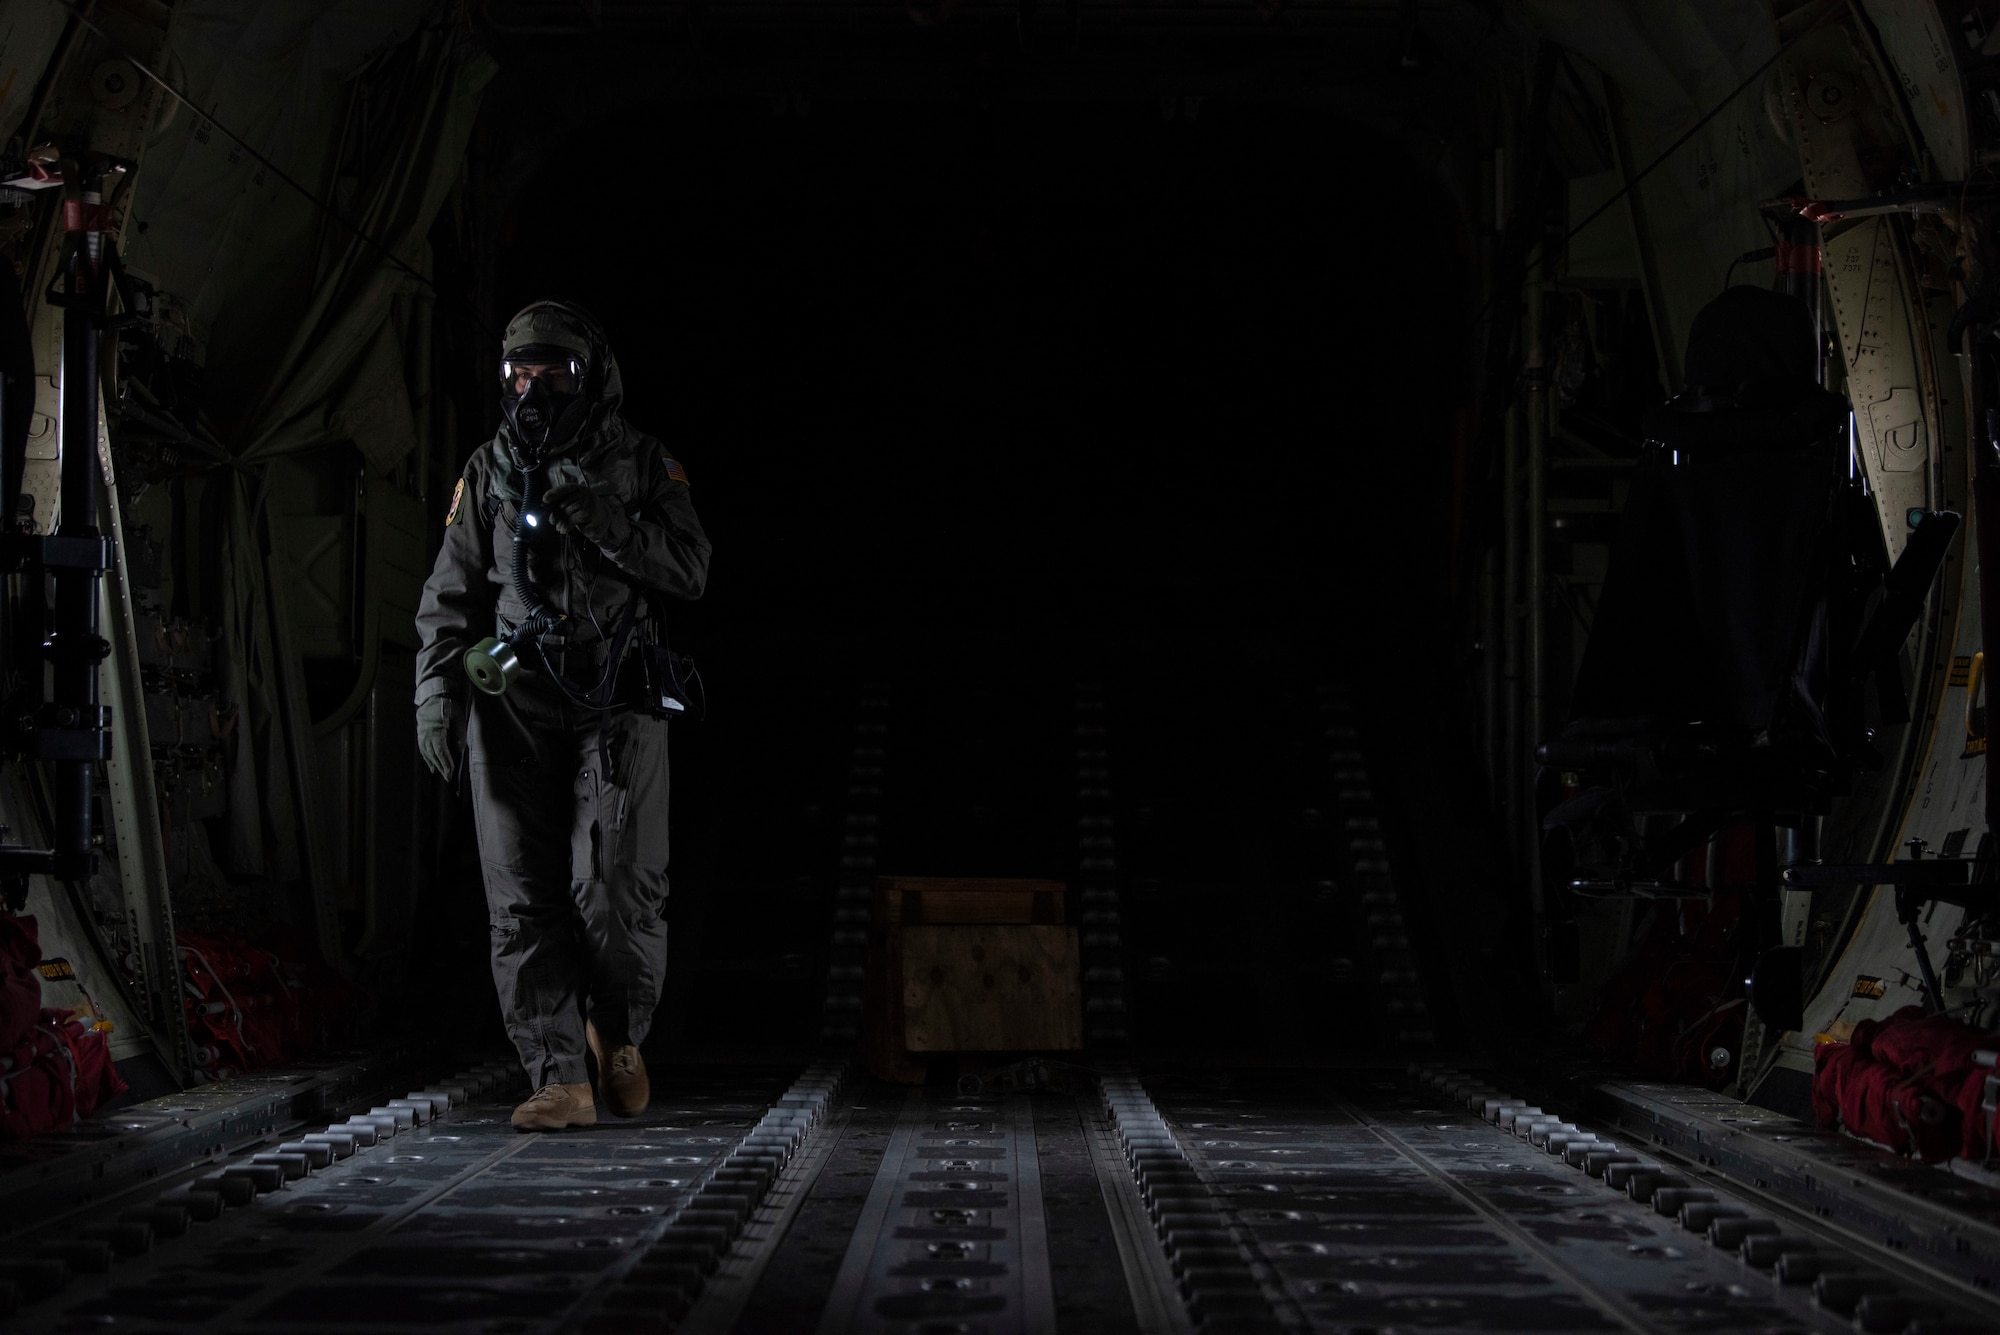 Staff Sgt. Tristan Geray, 40th Airlift Squadron loadmaster, conducts preflight checks in the cargo bay of a C-130J Super Hercules at Dyess Air Force Base, Texas, June 3, 2021. Geray participated in the field testing of the new Uniform Integrated Protective Ensemble Air 2 Piece Under Garment chemical, biological, radioactive and nuclear protective equipment.